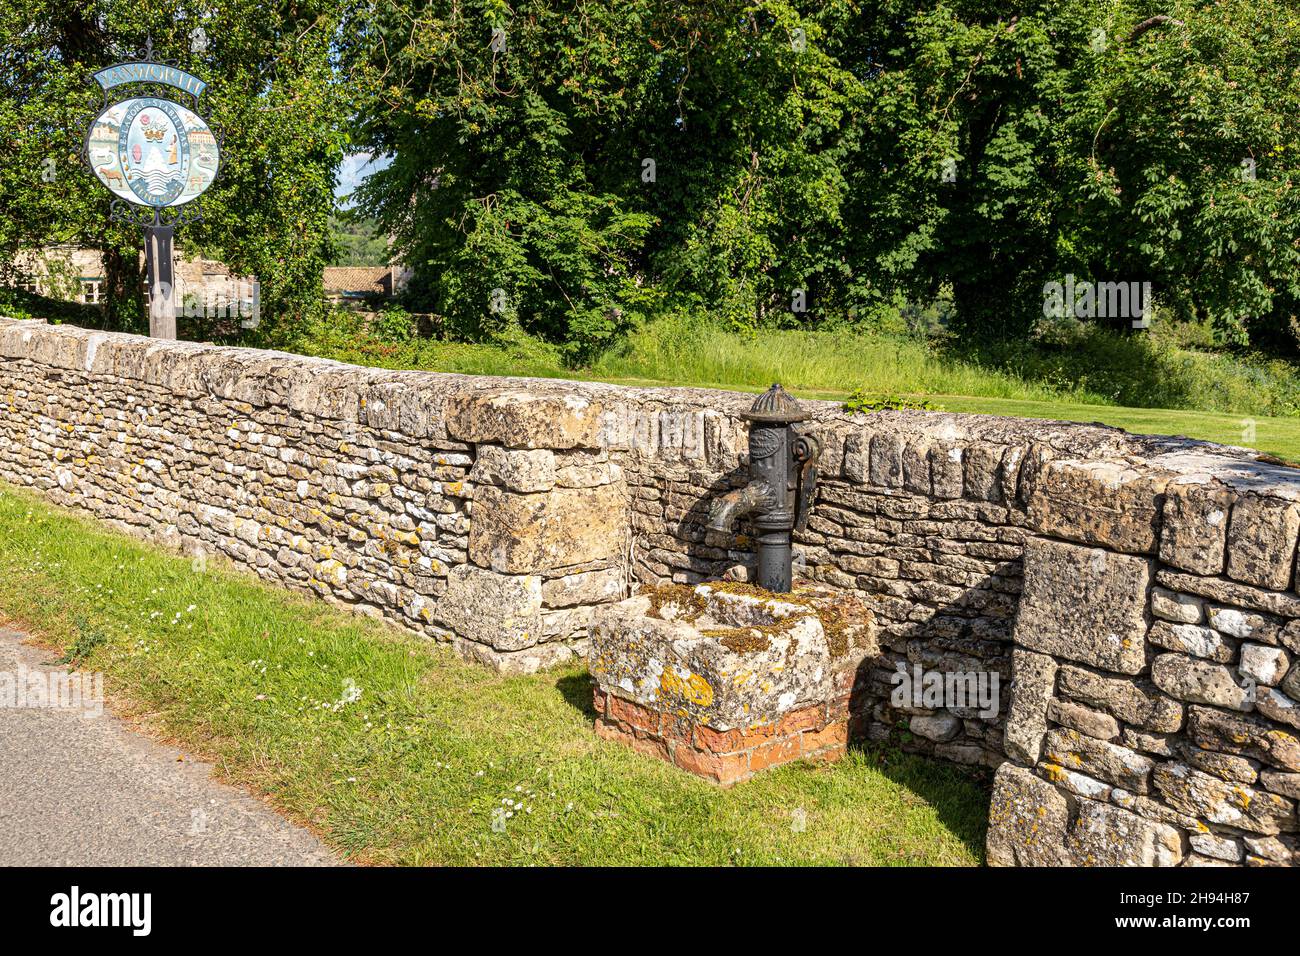 The old village water pump in the Cotswold village of Yanworth, Gloucestershire UK Stock Photo